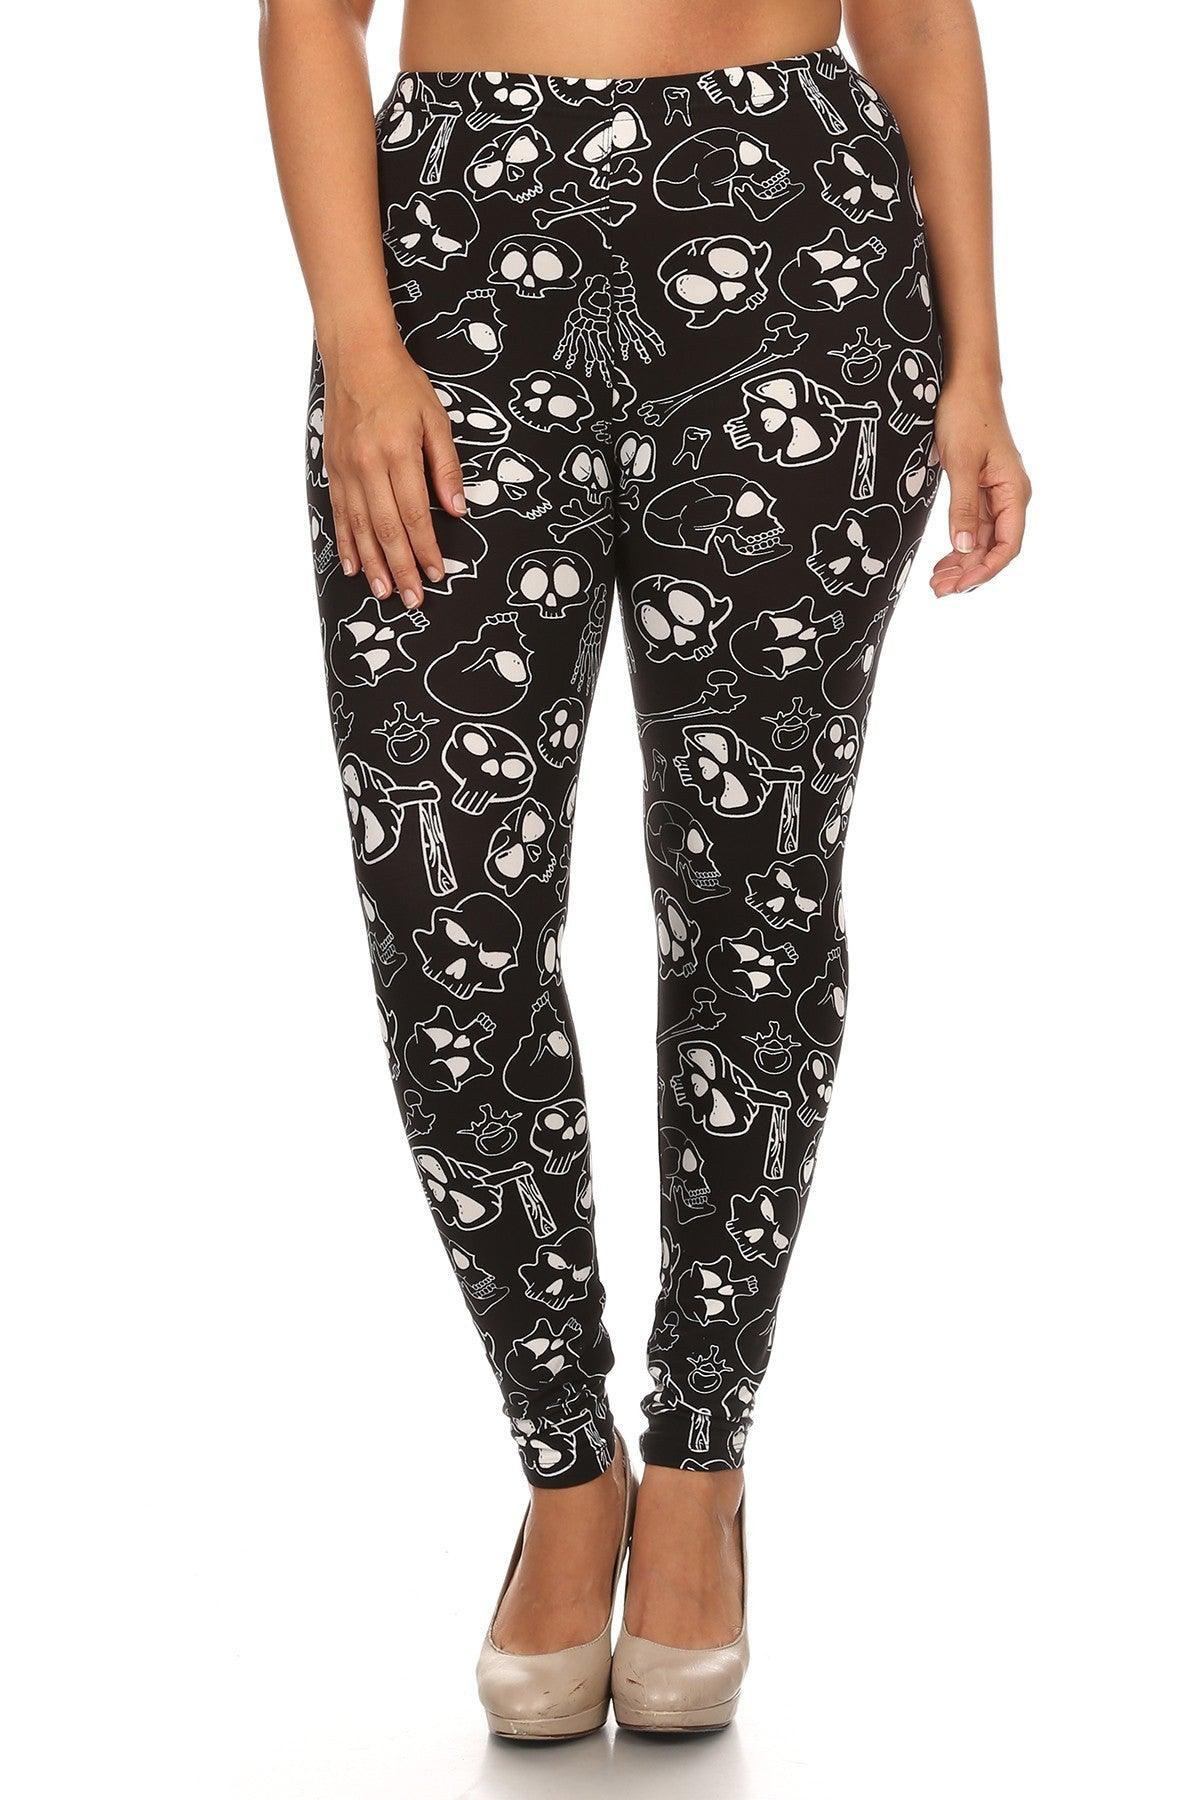 Plus Size Print, Full Length Leggings In A Fitted Style With A Banded High Waist Naughty Smile Fashion